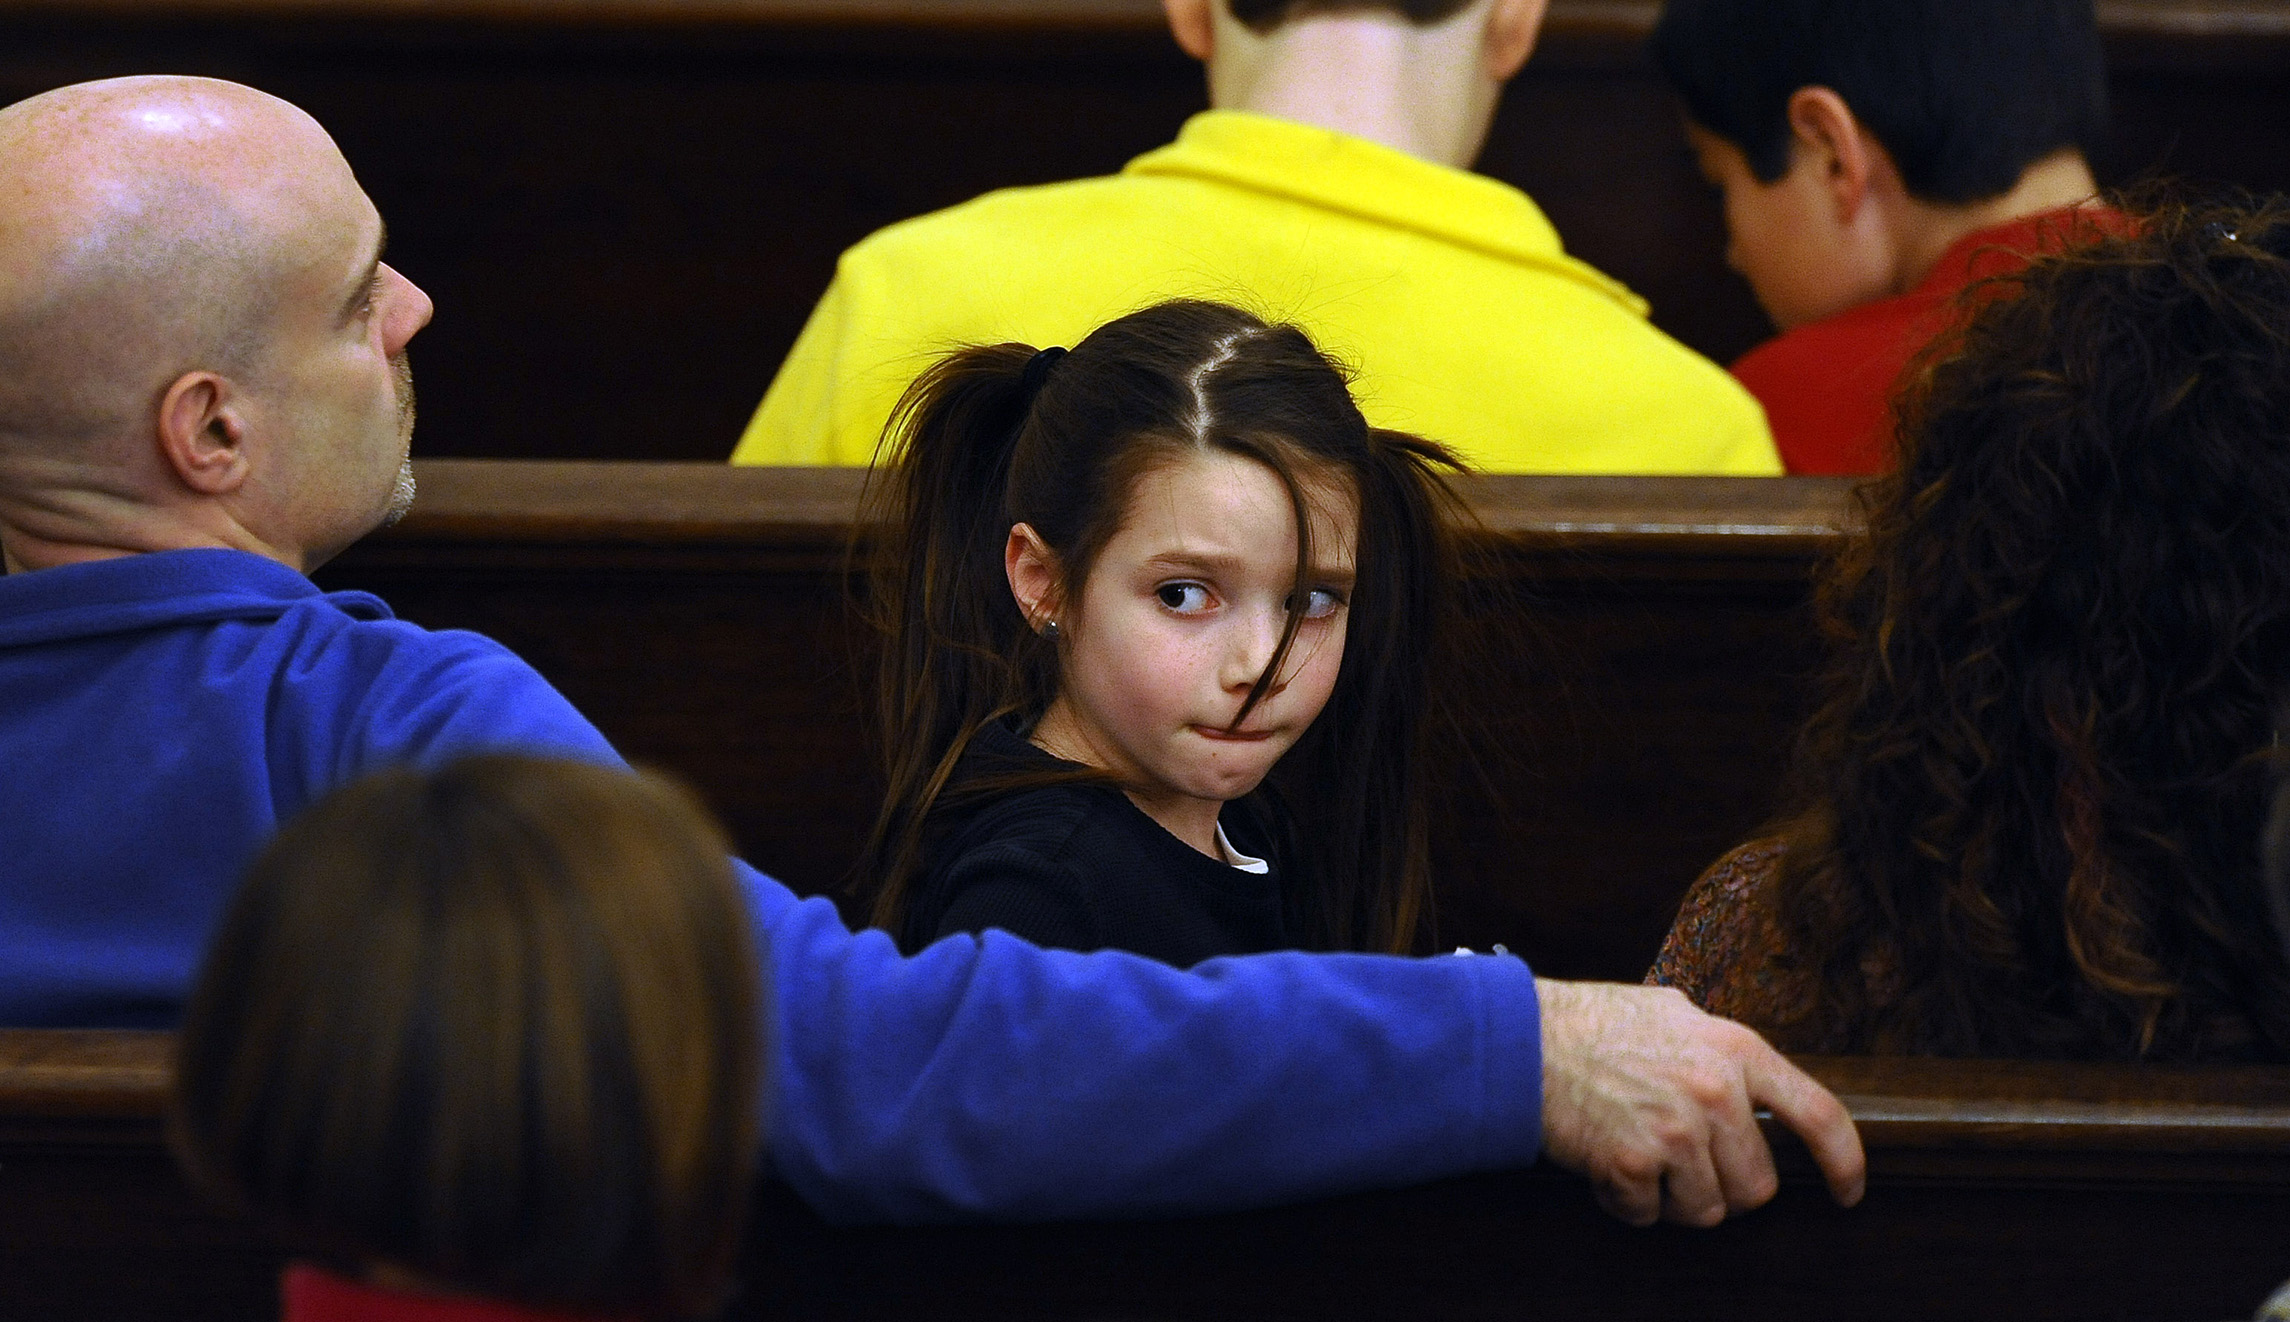 A girl sits with her family in a pew during a sermon at a church.